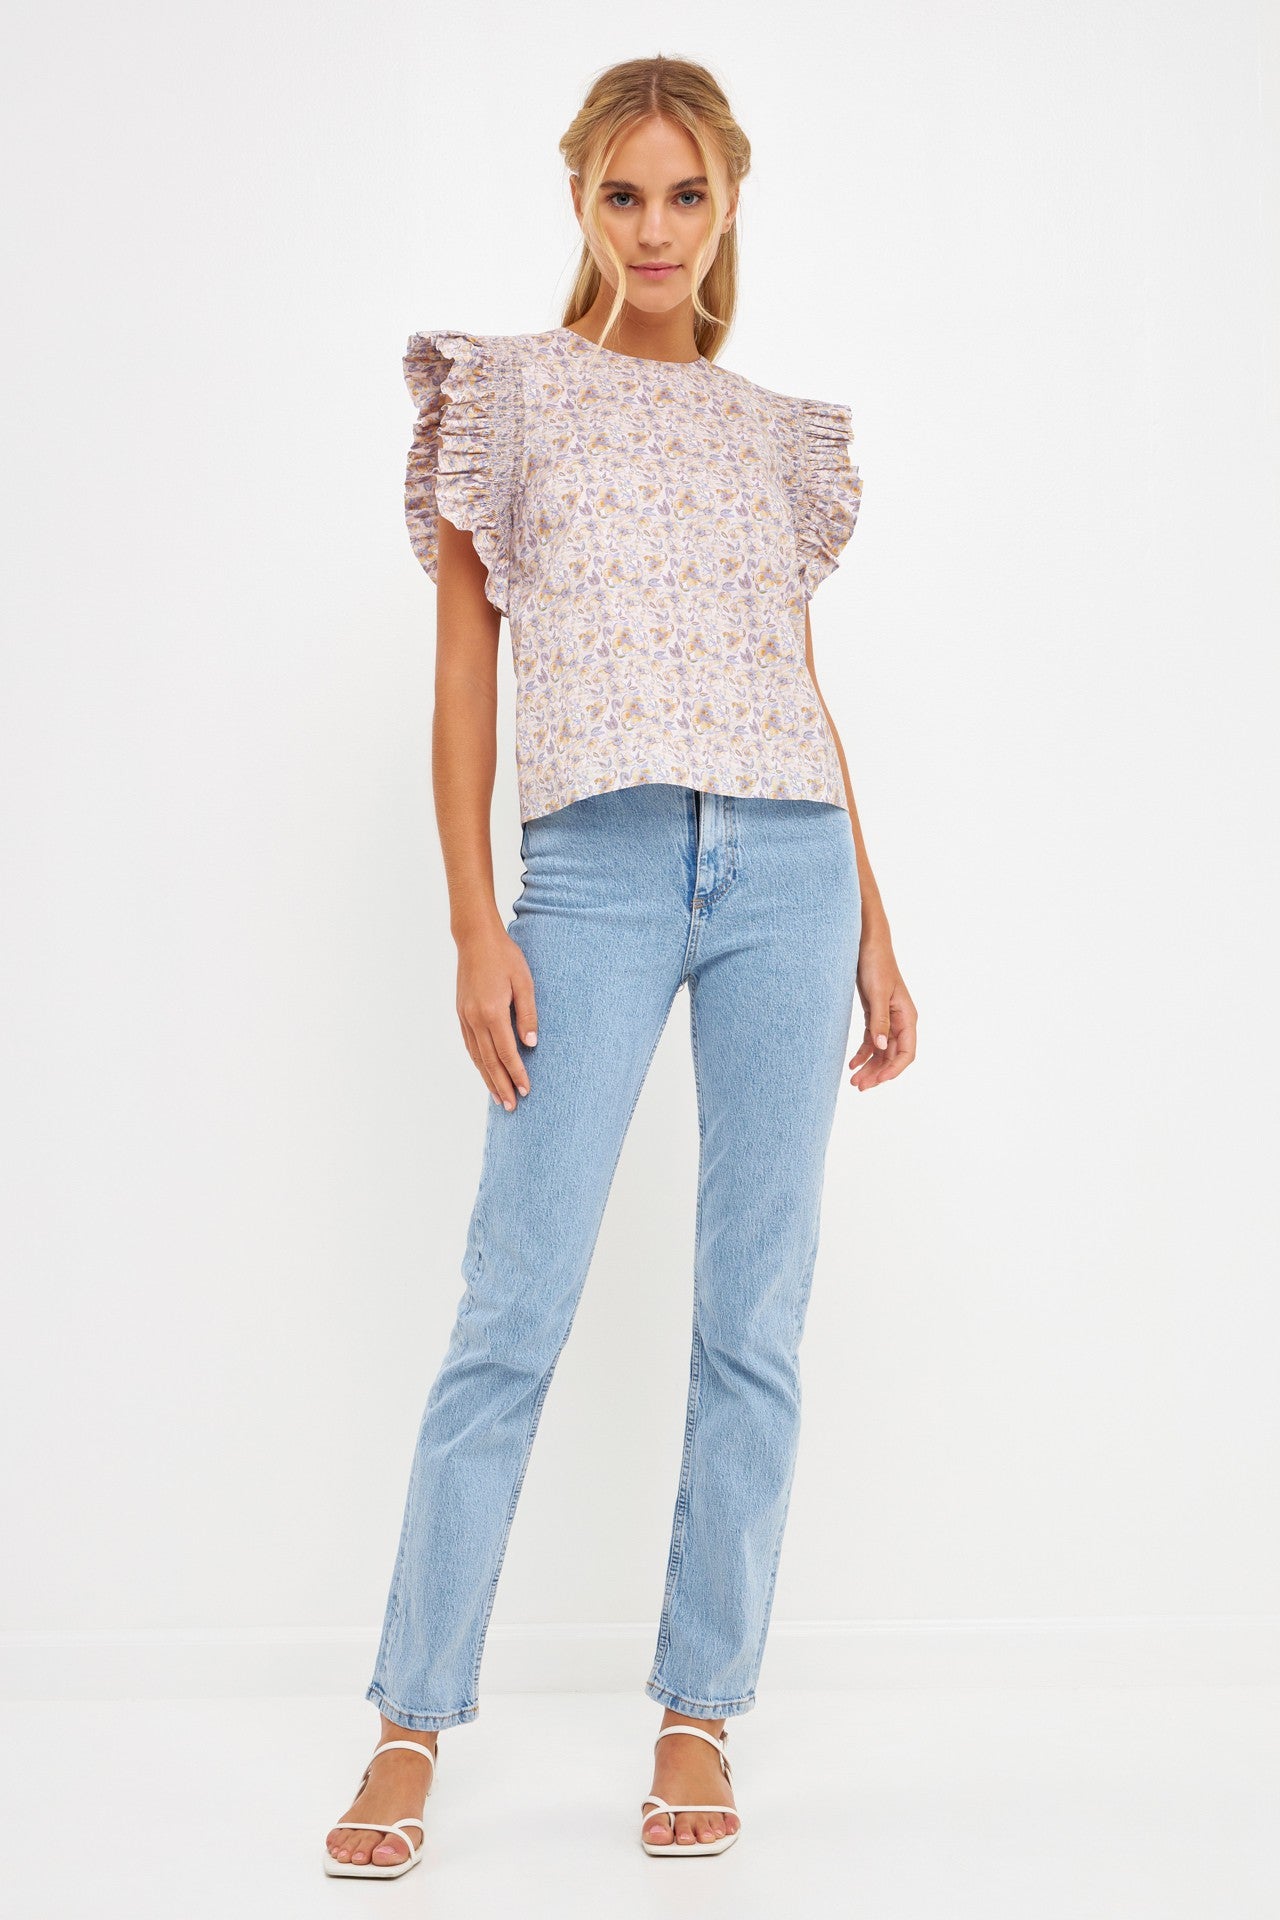 English FactoryLily Floral Top - Polish Boutique